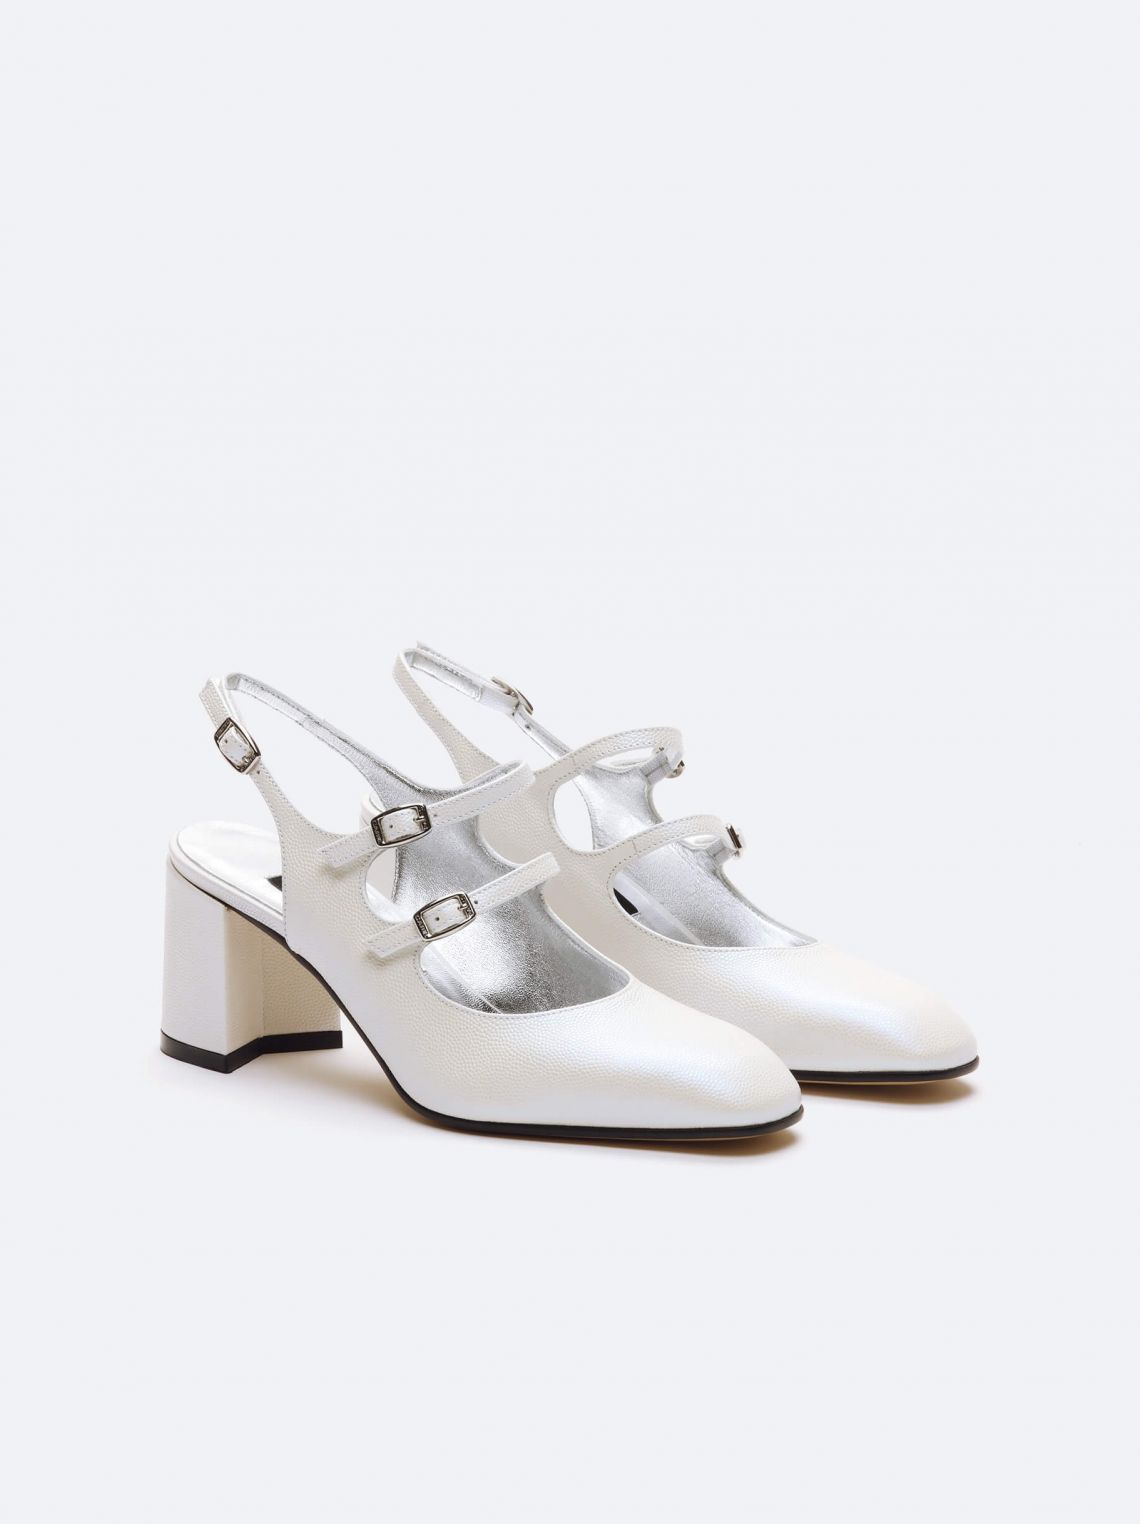 Mary Janes with straps| Carel Paris (2)